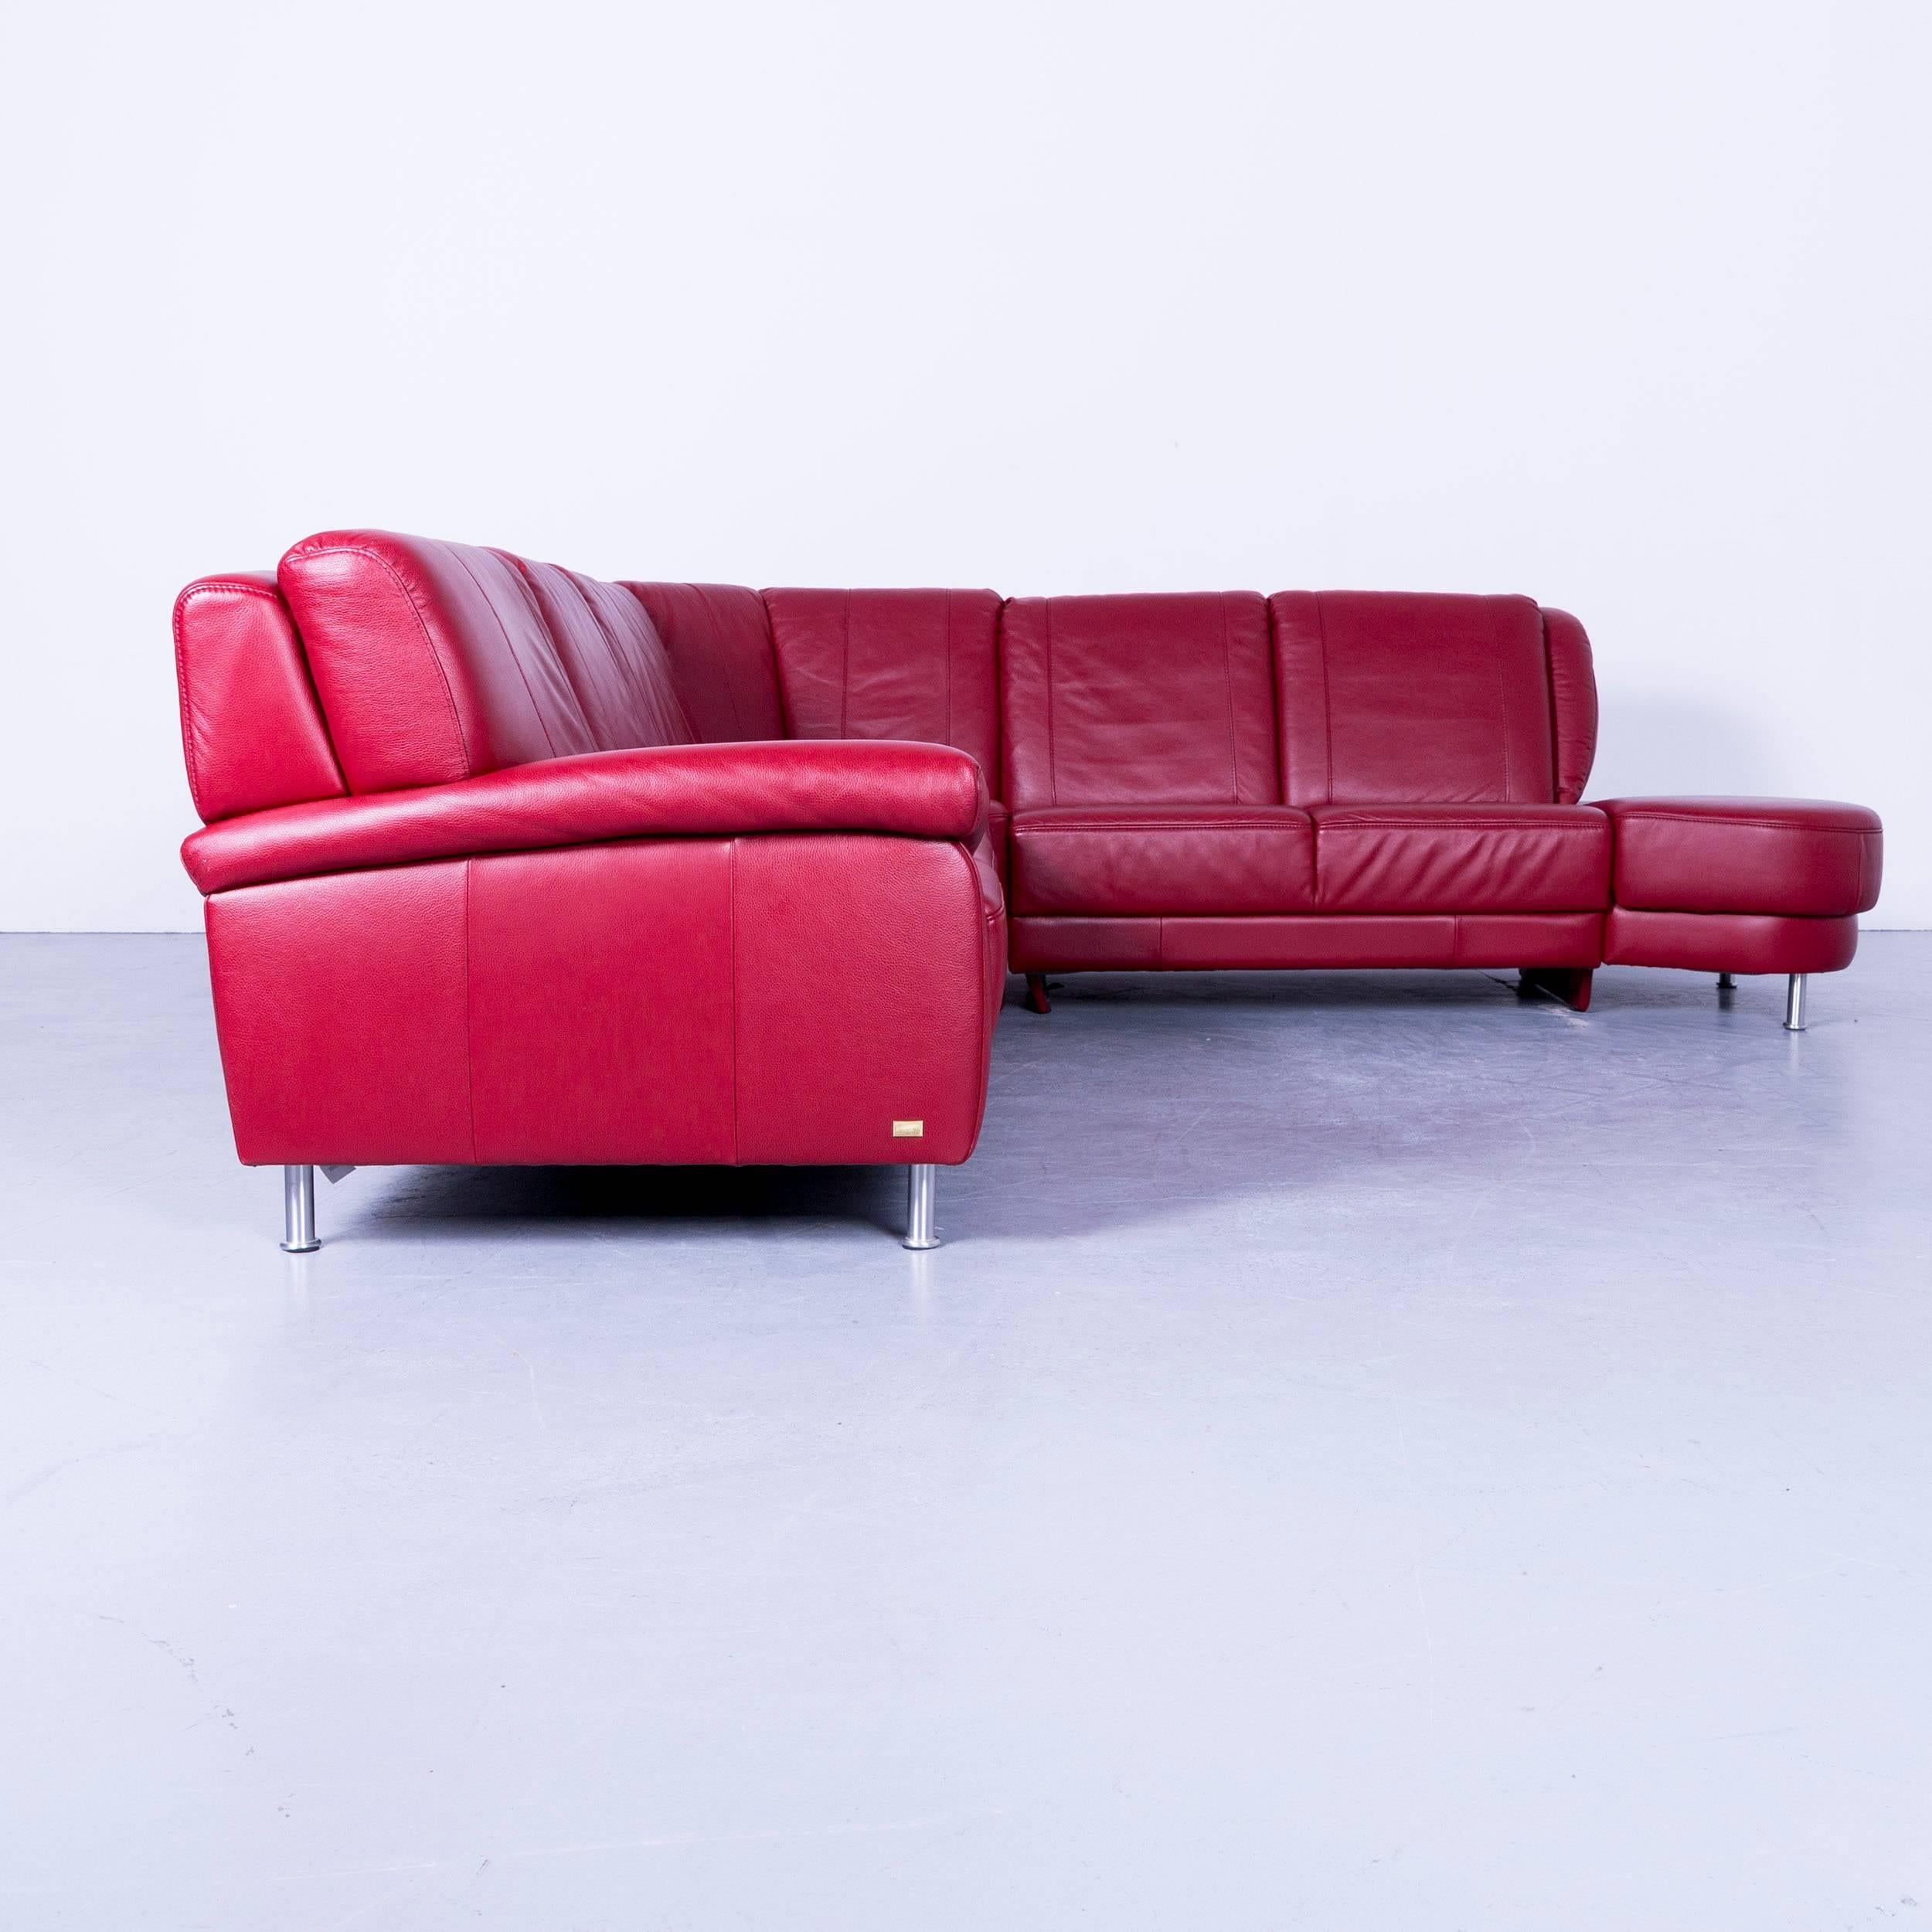 Himolla Corner Sofa Leather Red Modern Couch 2